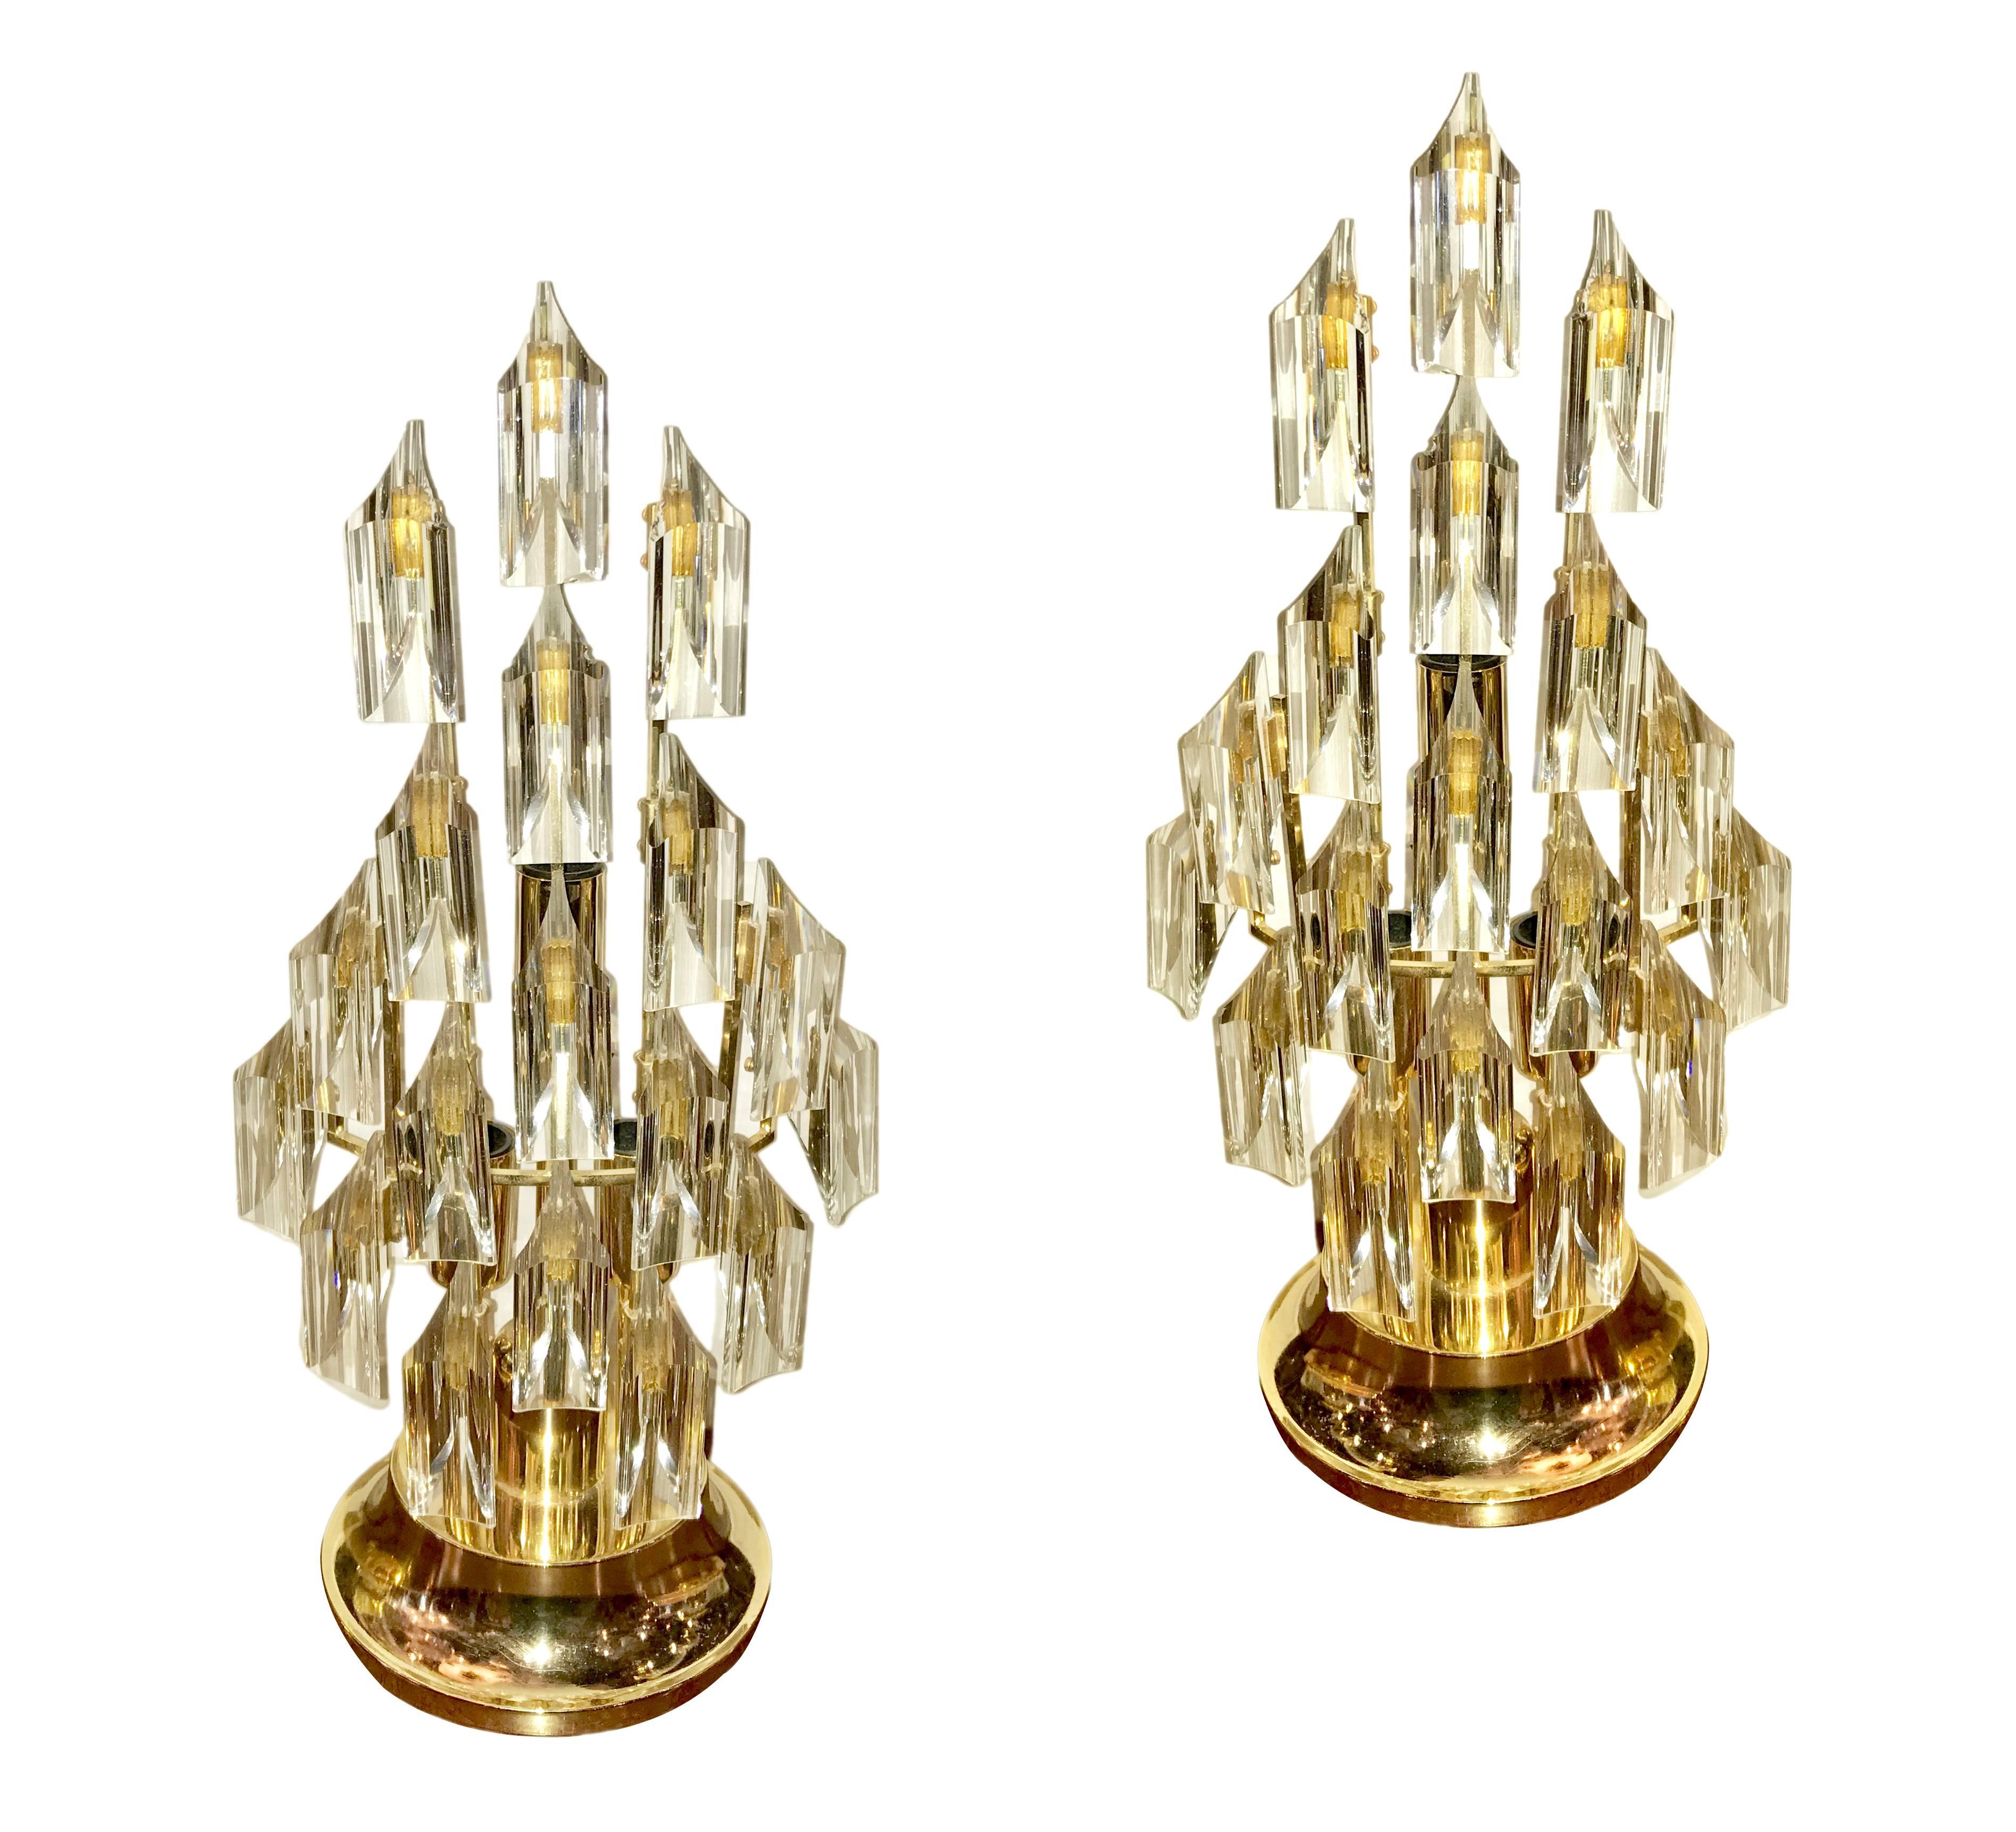 Pair of 1960s Italian gilt table lamps with crystal insets, three interior lights

Measurements:
19